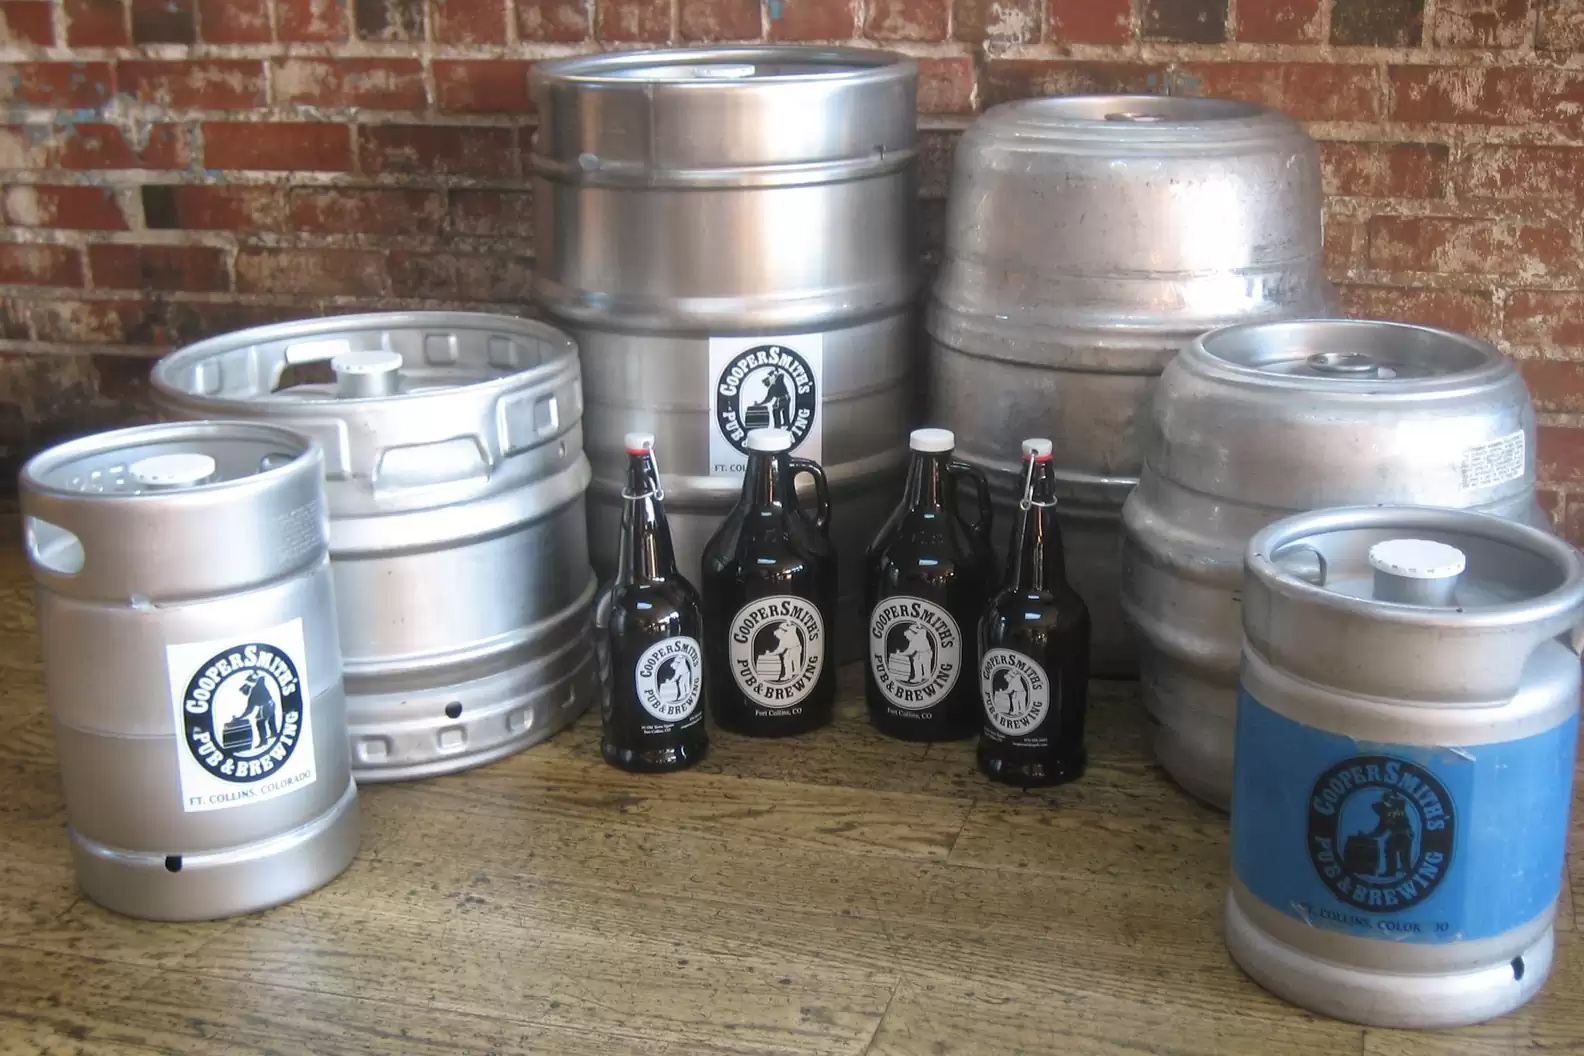 A selection of kegs and growlers from CooperSmith’s Pub and Brewing Company in Fort Collins, northern Colorado, is on display.